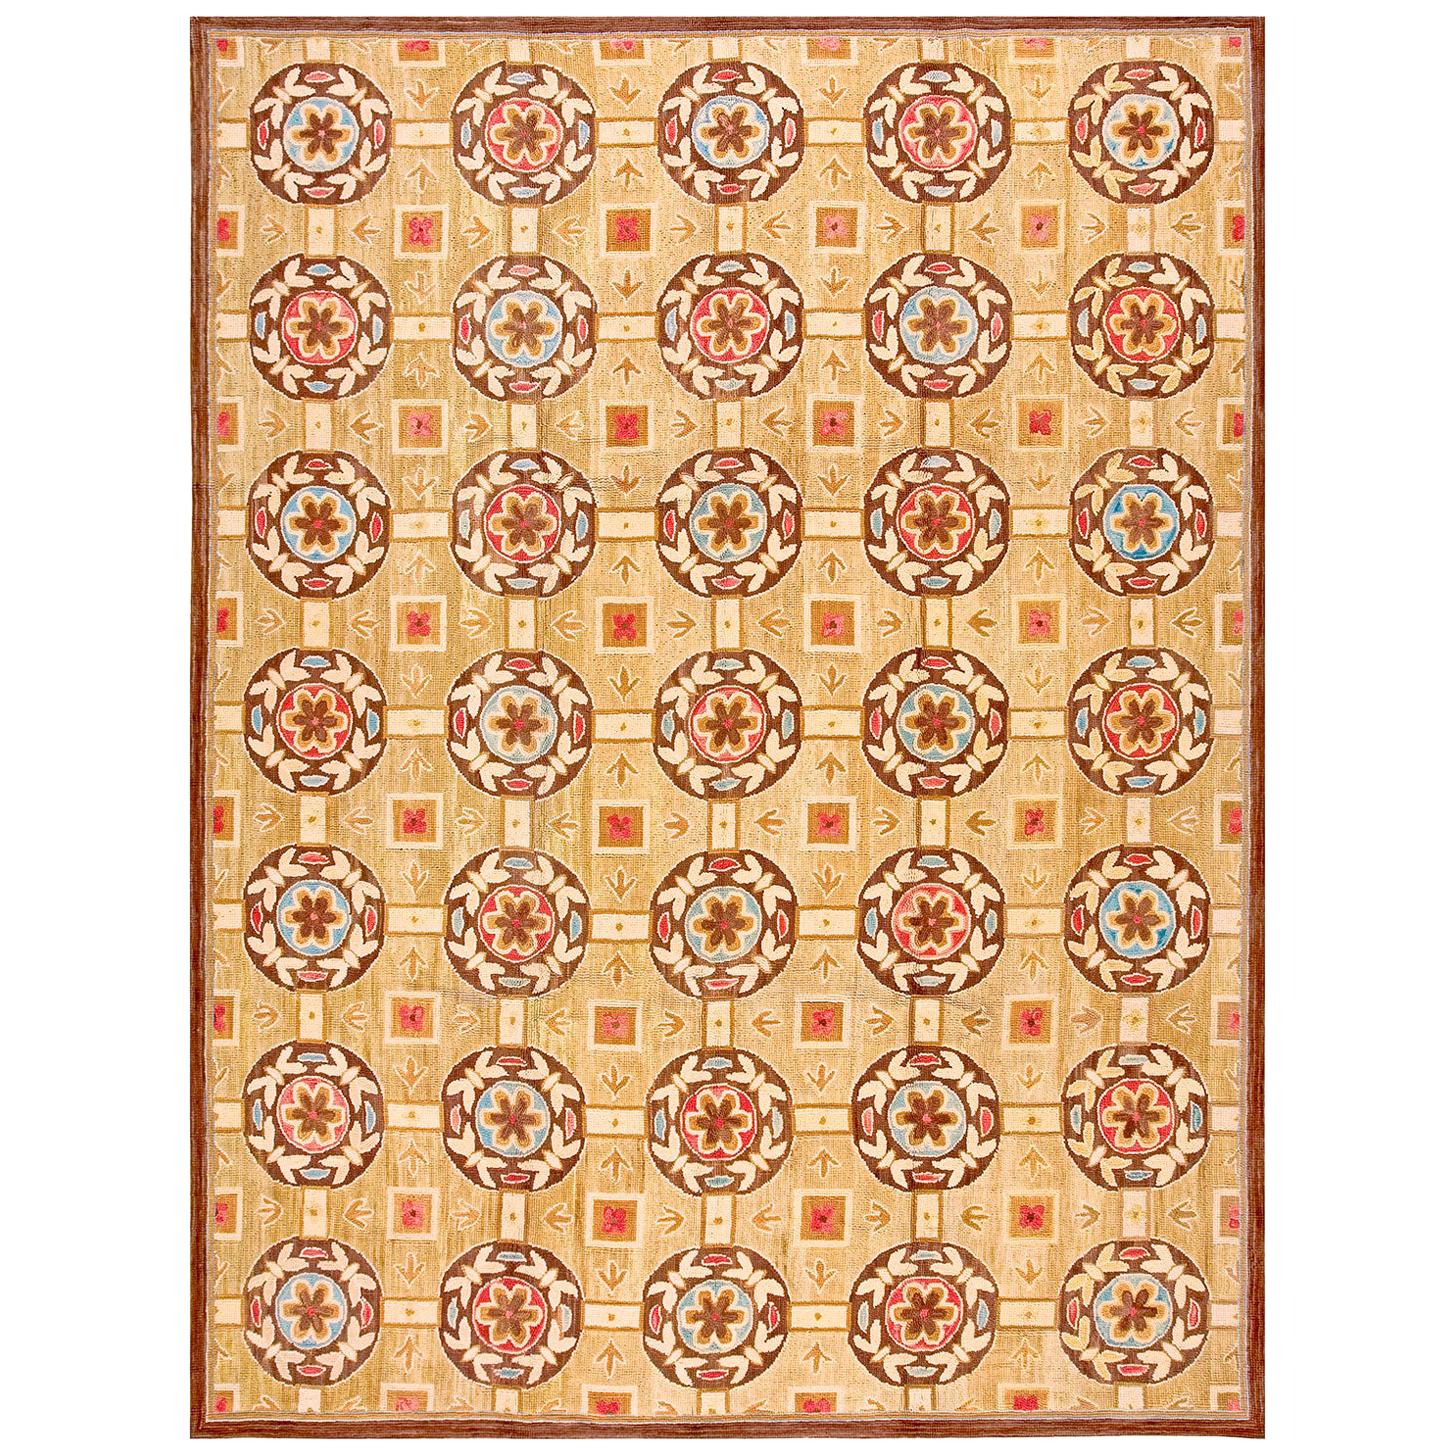 Contemporary Handmade Cotton Hooked Rug ( 10' x 14' - 305 x 427cm ) For Sale